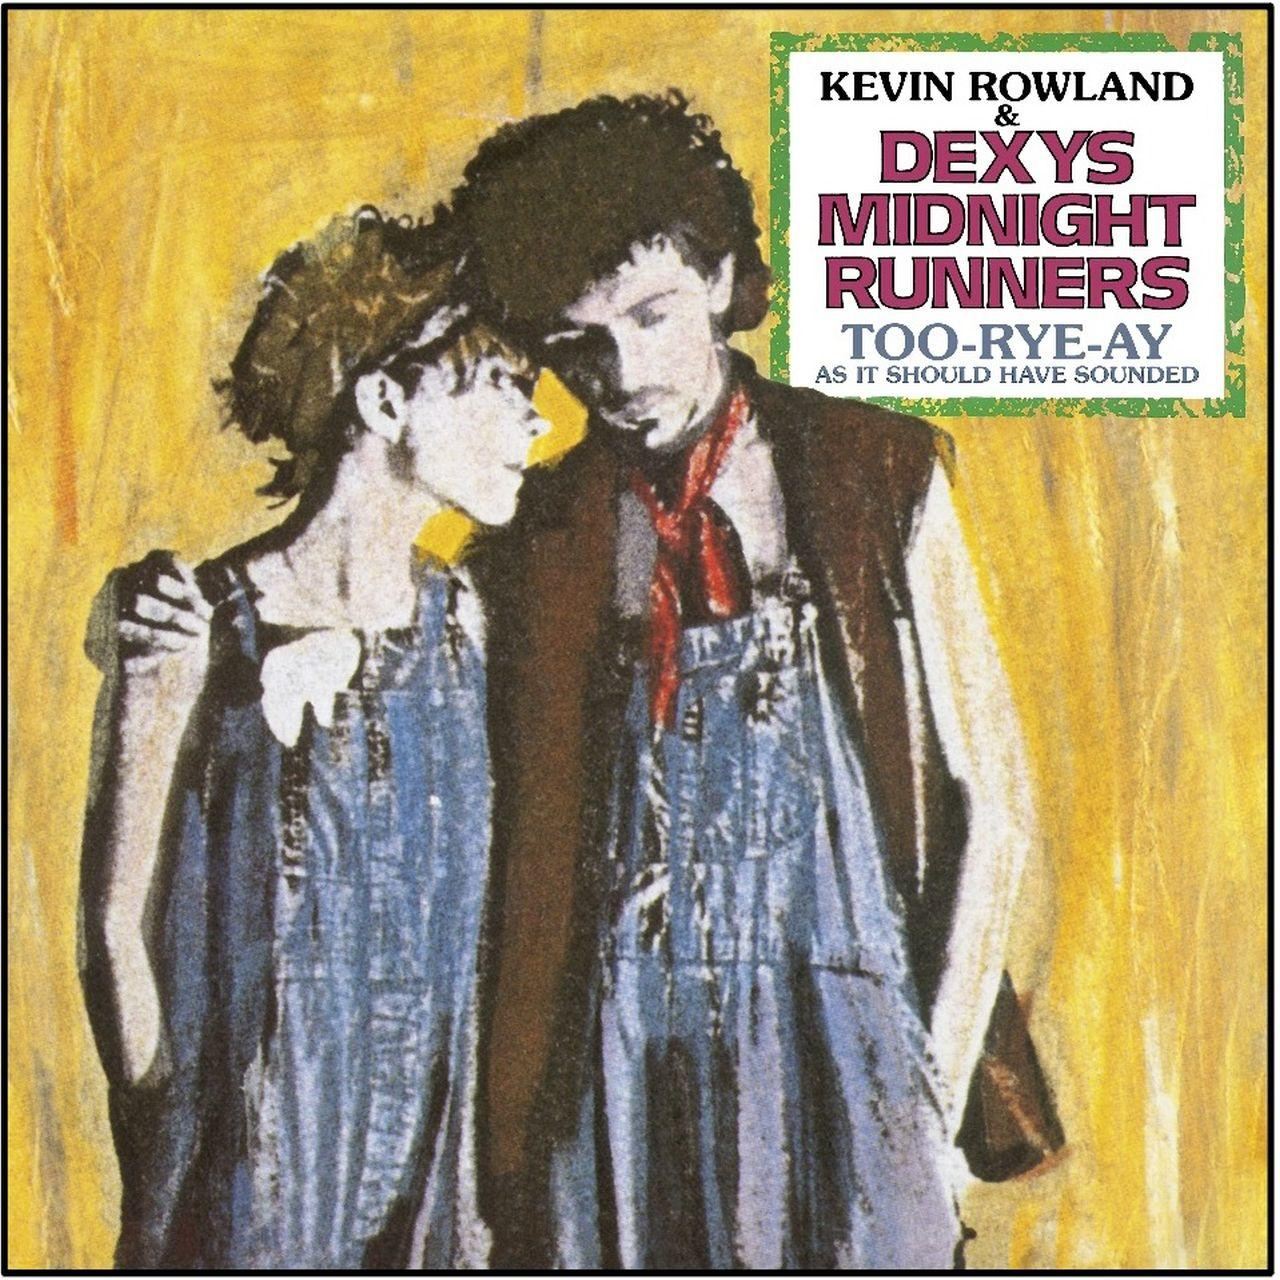 - (CD) It Midnight Too-Rye-Ay, - Should As & Have (Deluxe Rowland Remix) Anniversary Dexy\'s Kevin Edition) (40th Runners Sounded